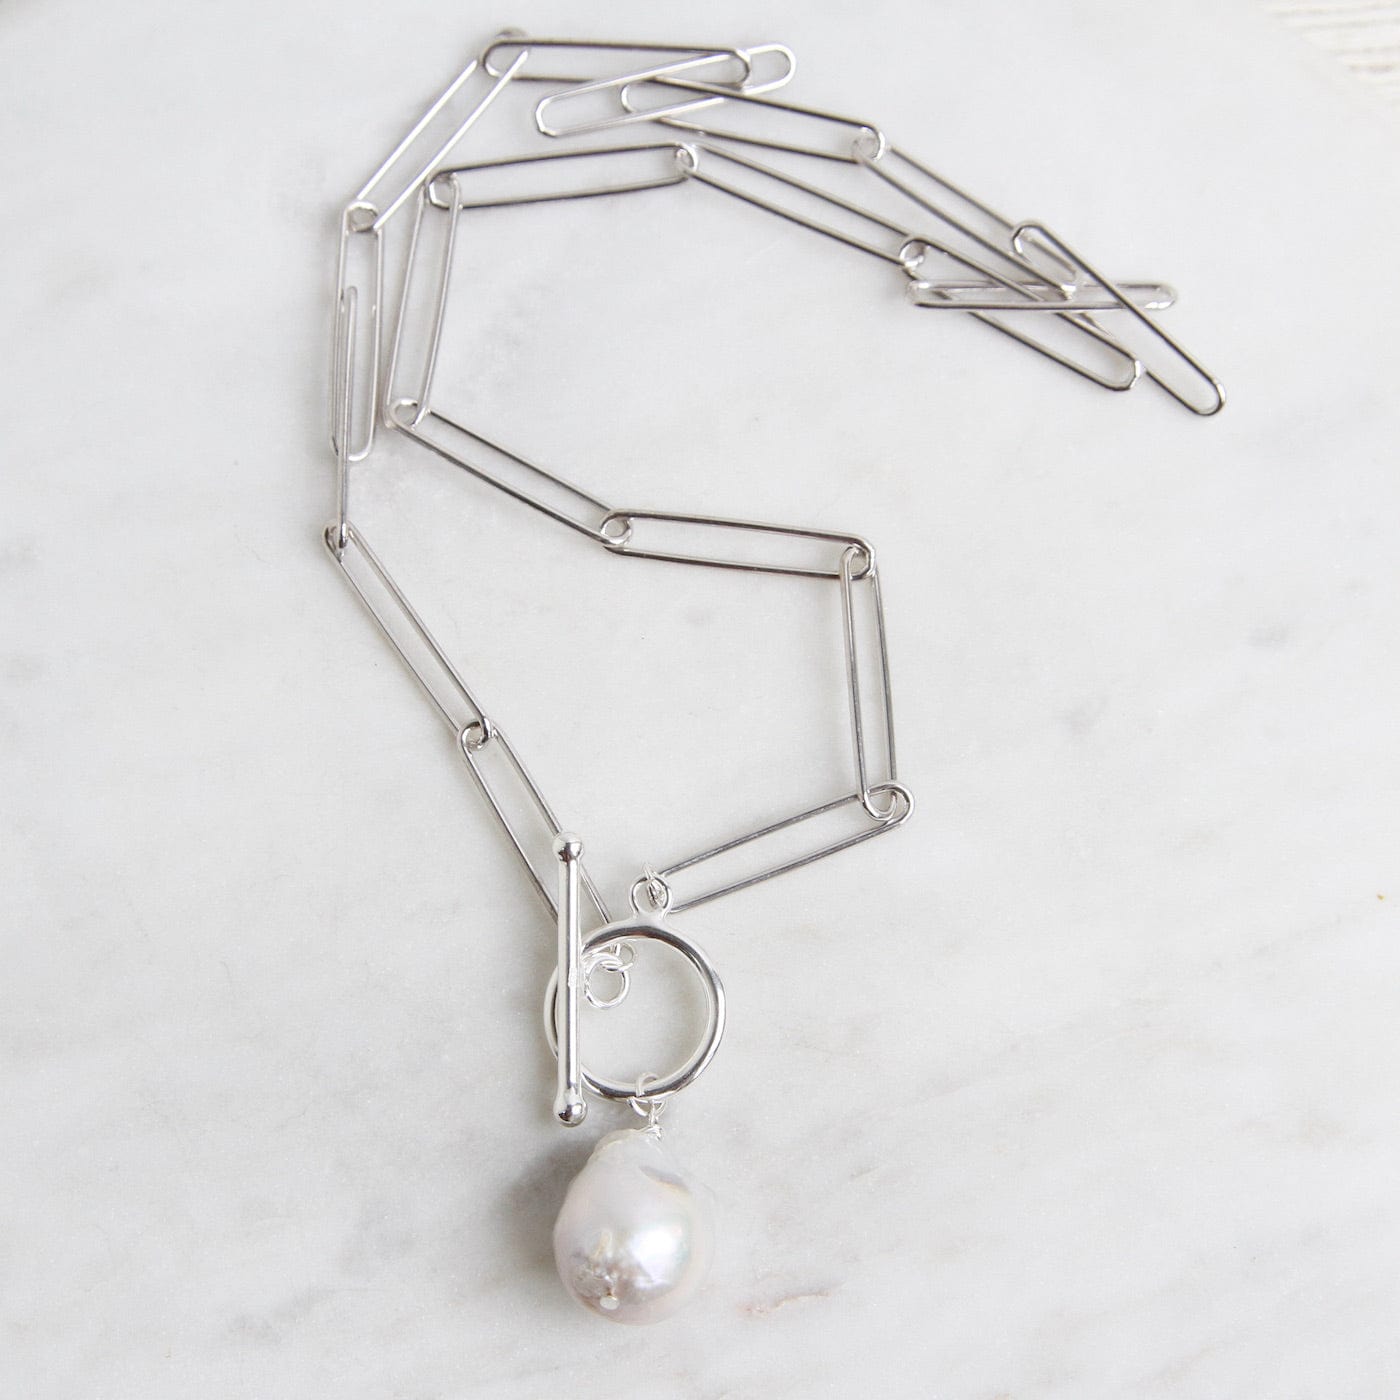 NKL Savannah Pearl Necklace - Sterling Silver